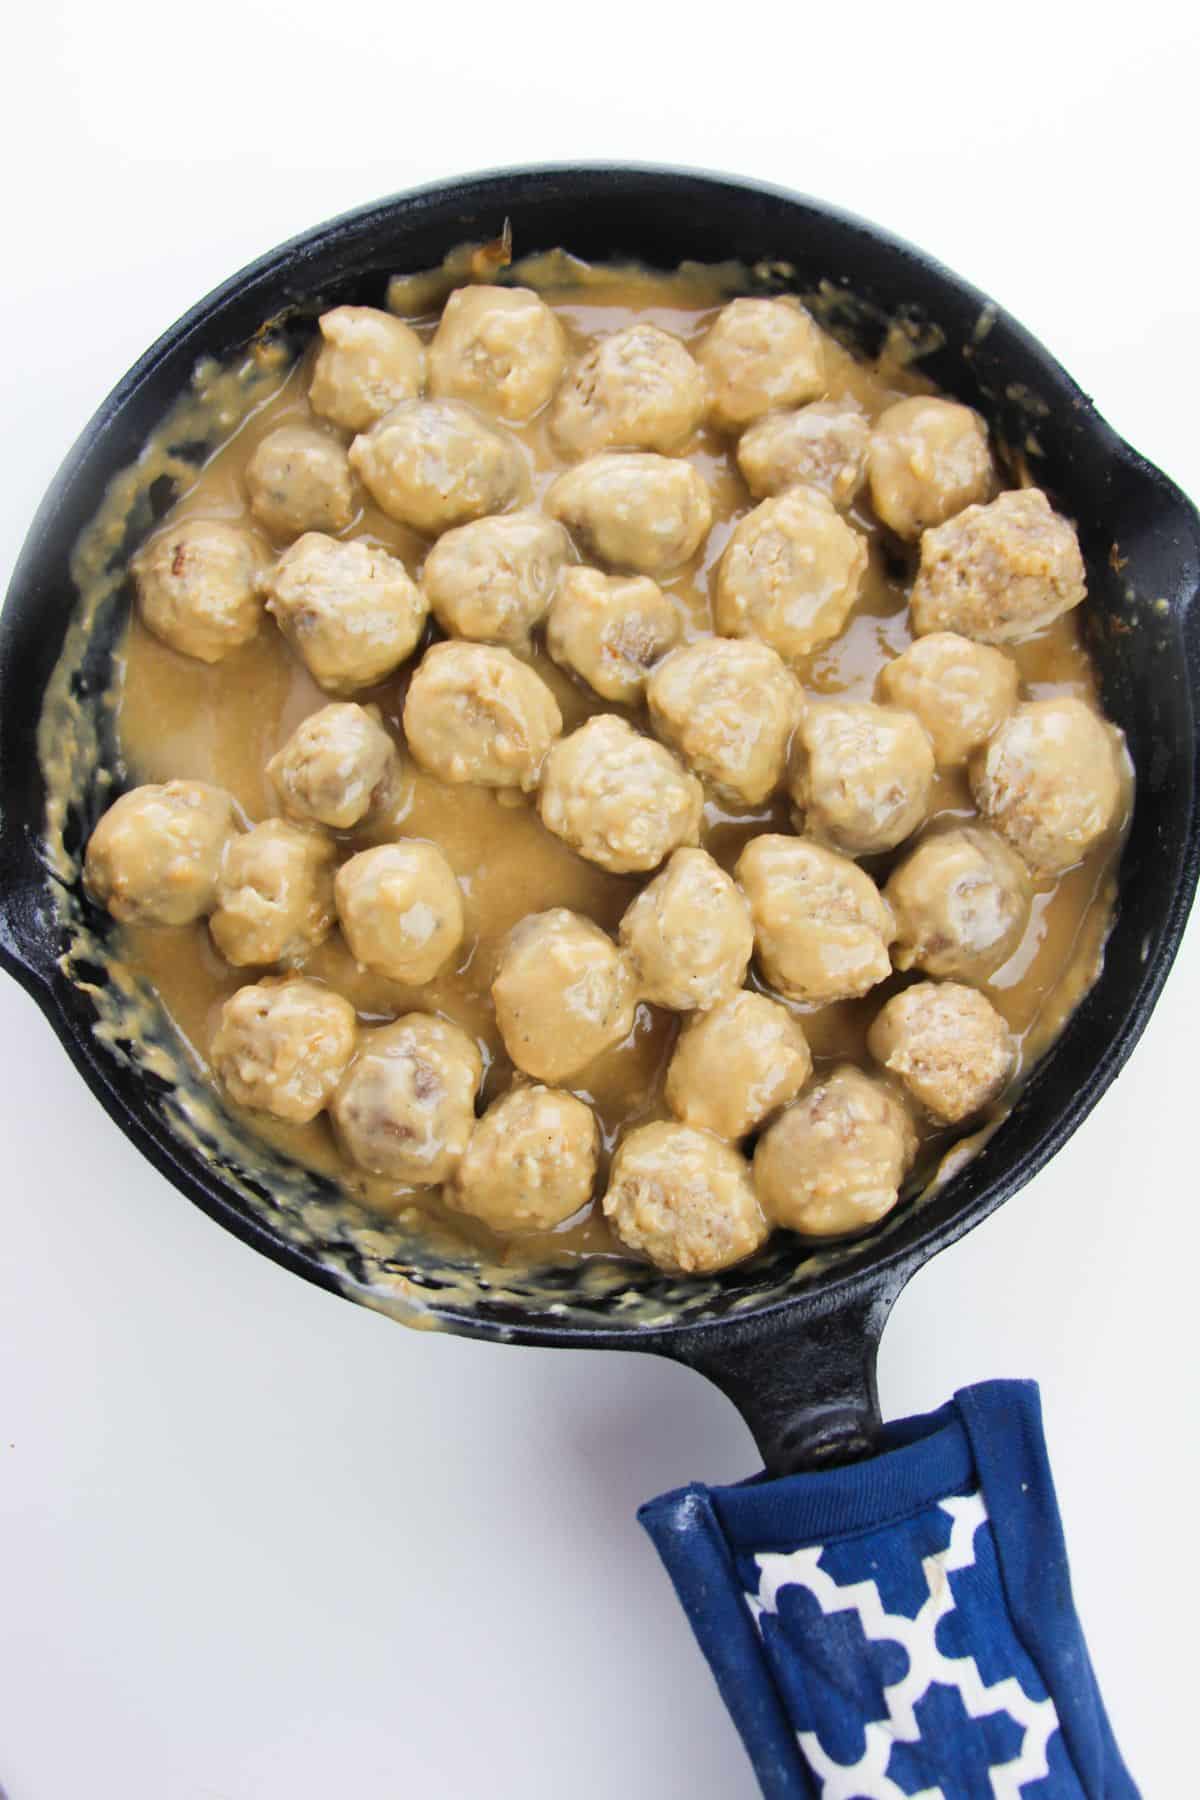 The meatballs are added to the gravy mixture.